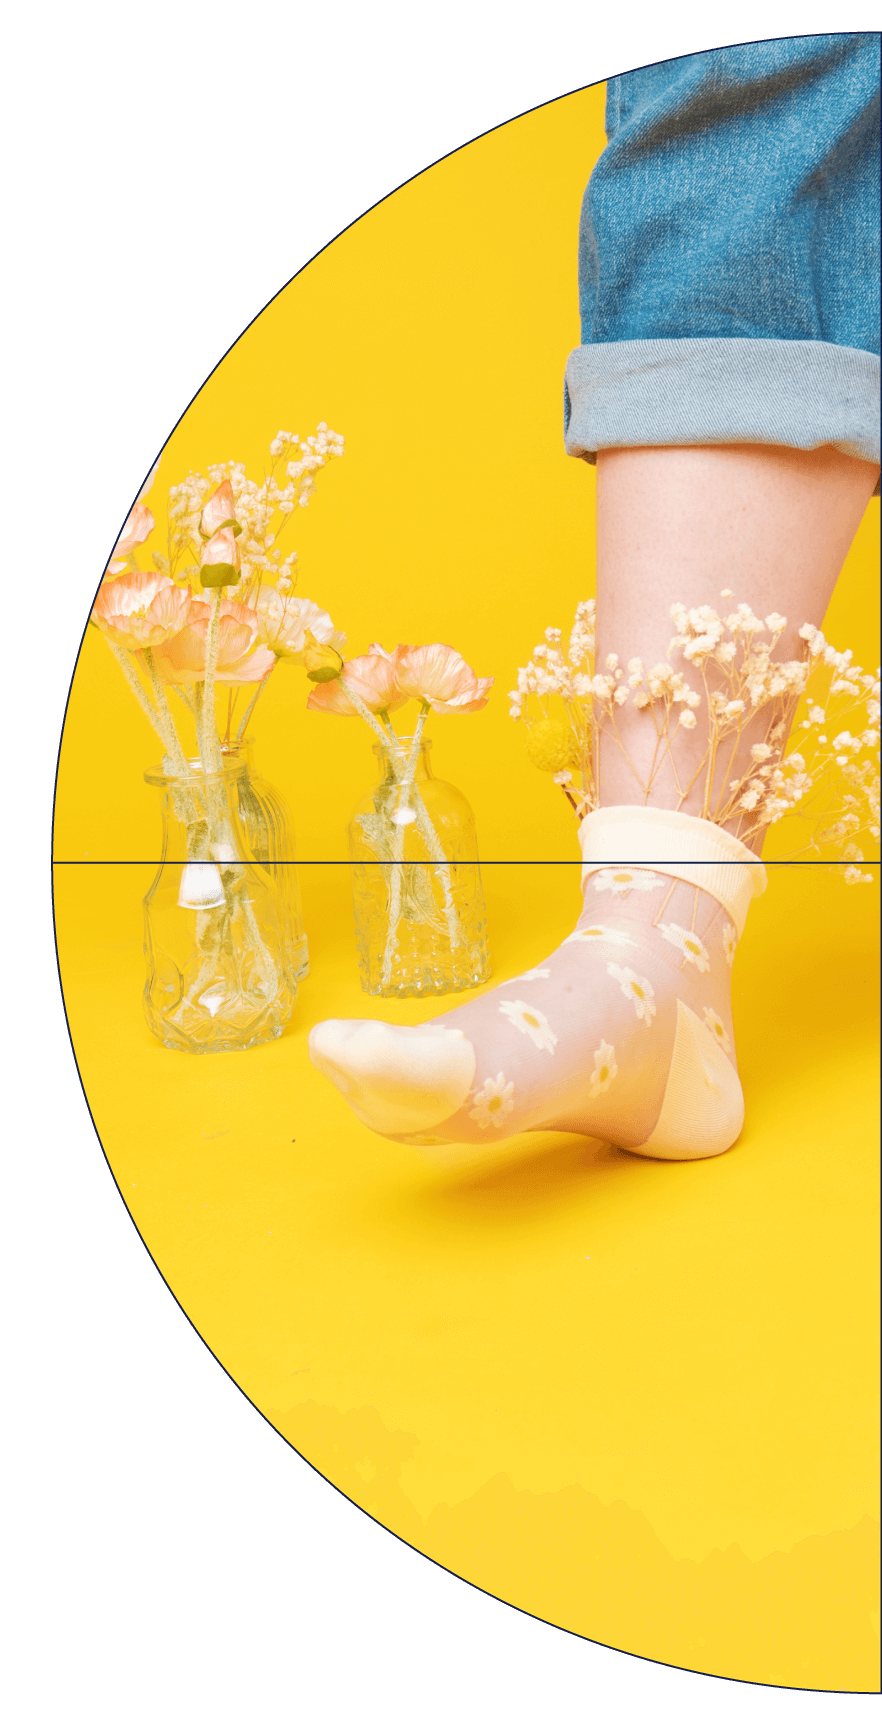 WholeCo - Carly stepping out with babys breath in her socks@2x